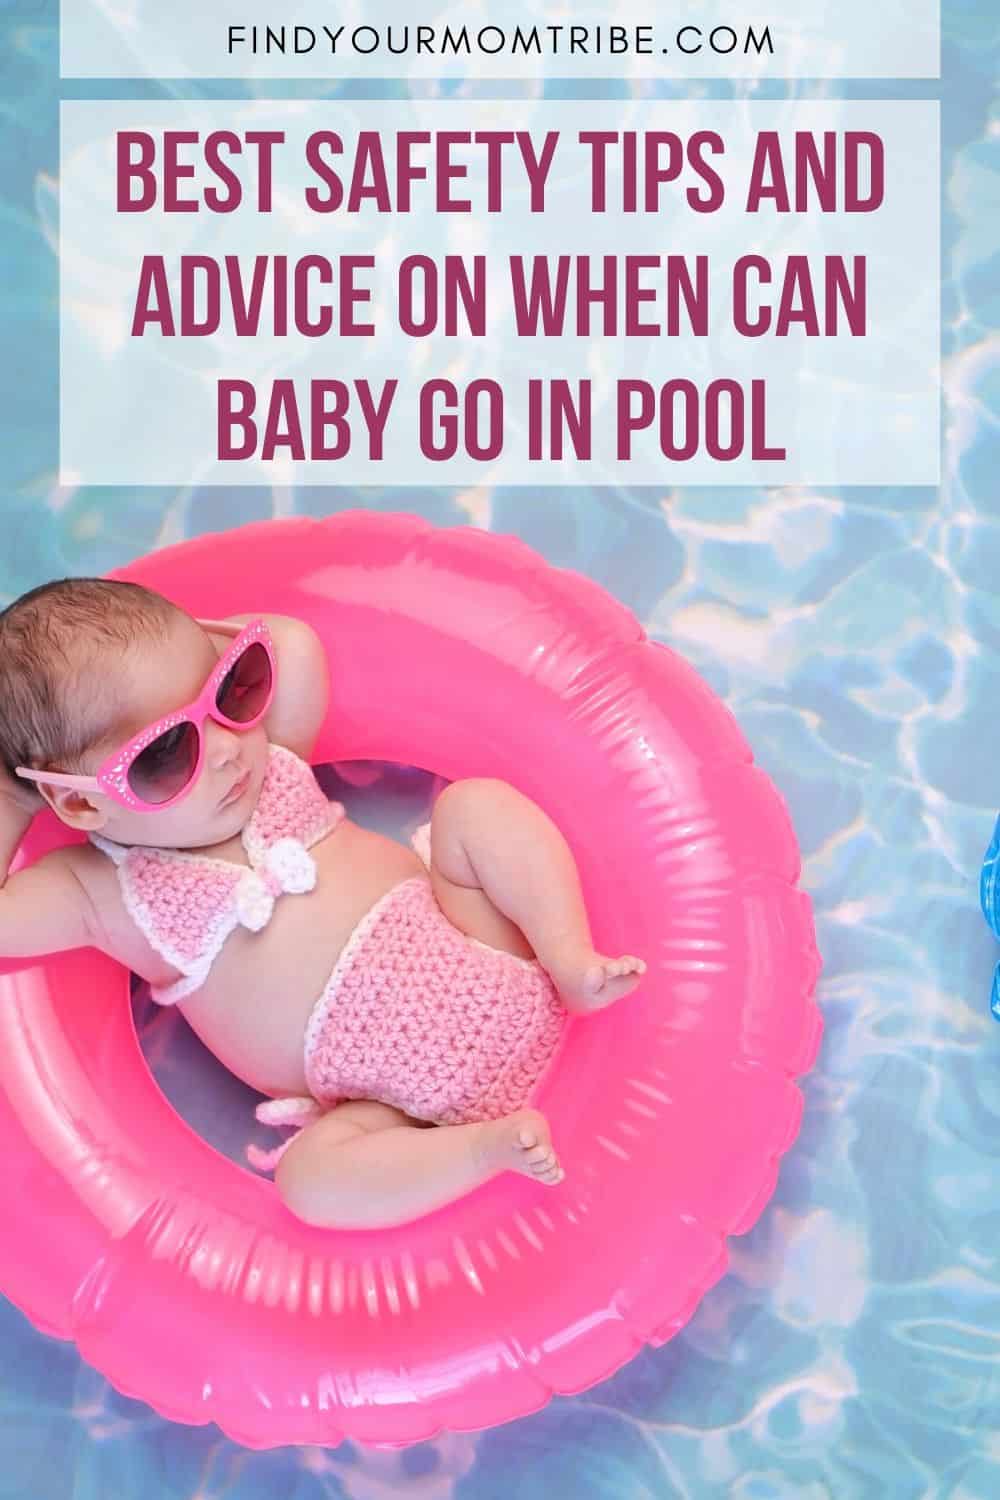 Best Safety Tips And Advice On When Can Baby Go In Pool Pinterest